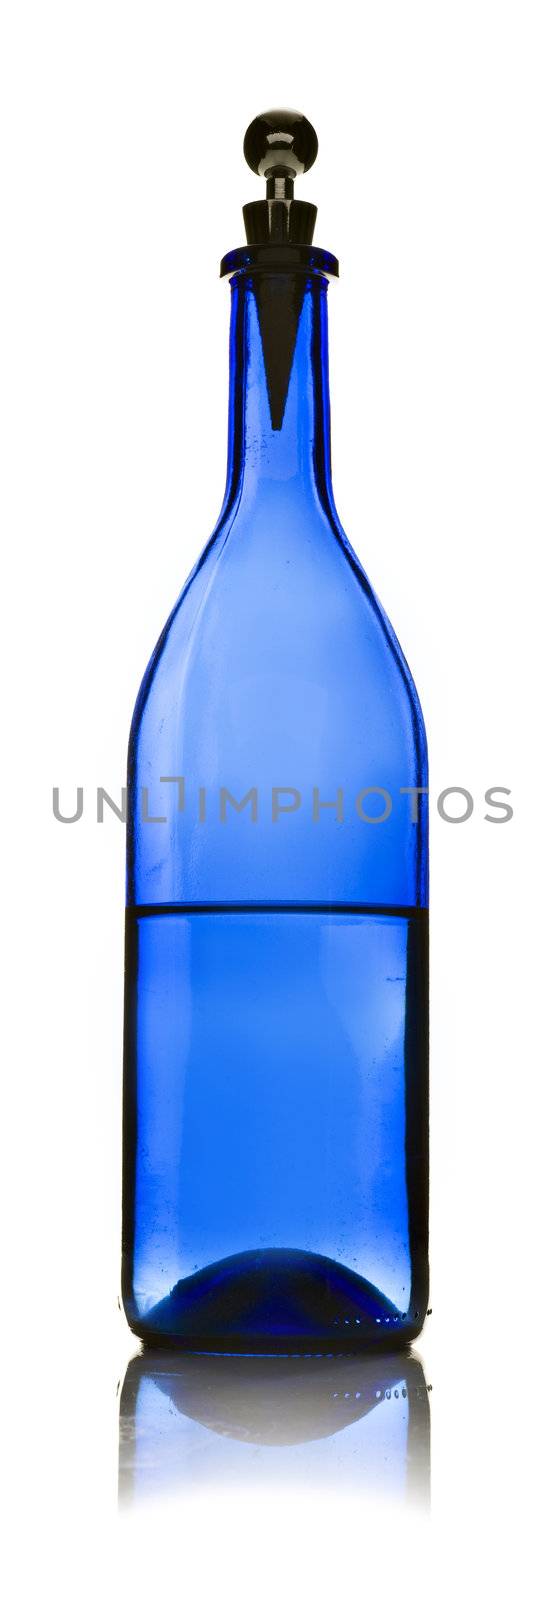 One blue glass bottle with water on a white background